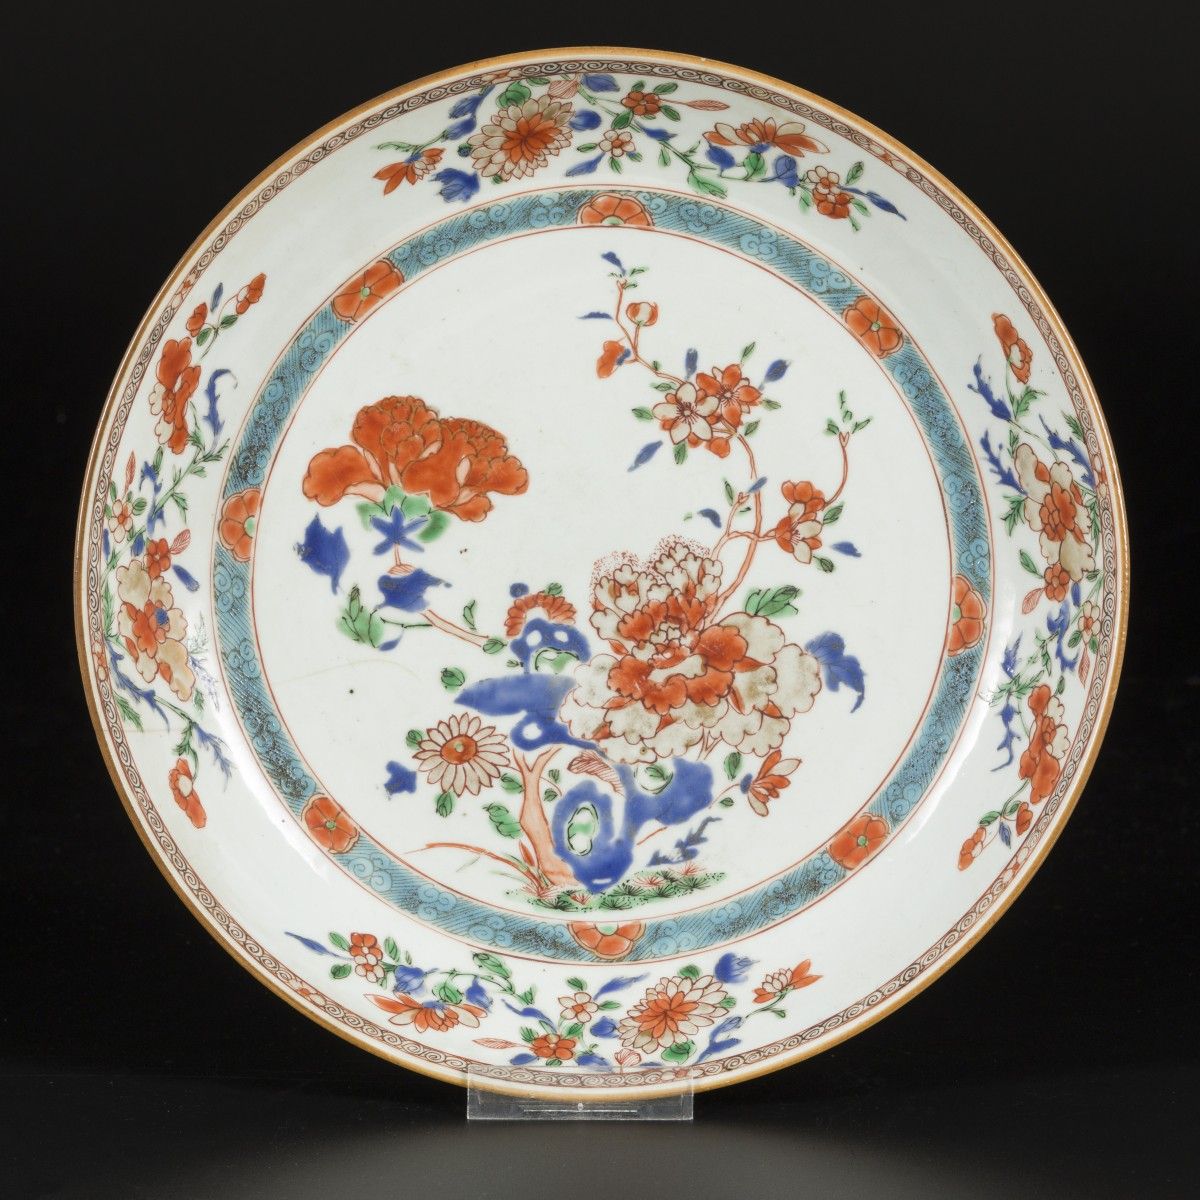 A porcelain charger with floral decorations, China, 18th century. Durchm. 28 cm.&hellip;